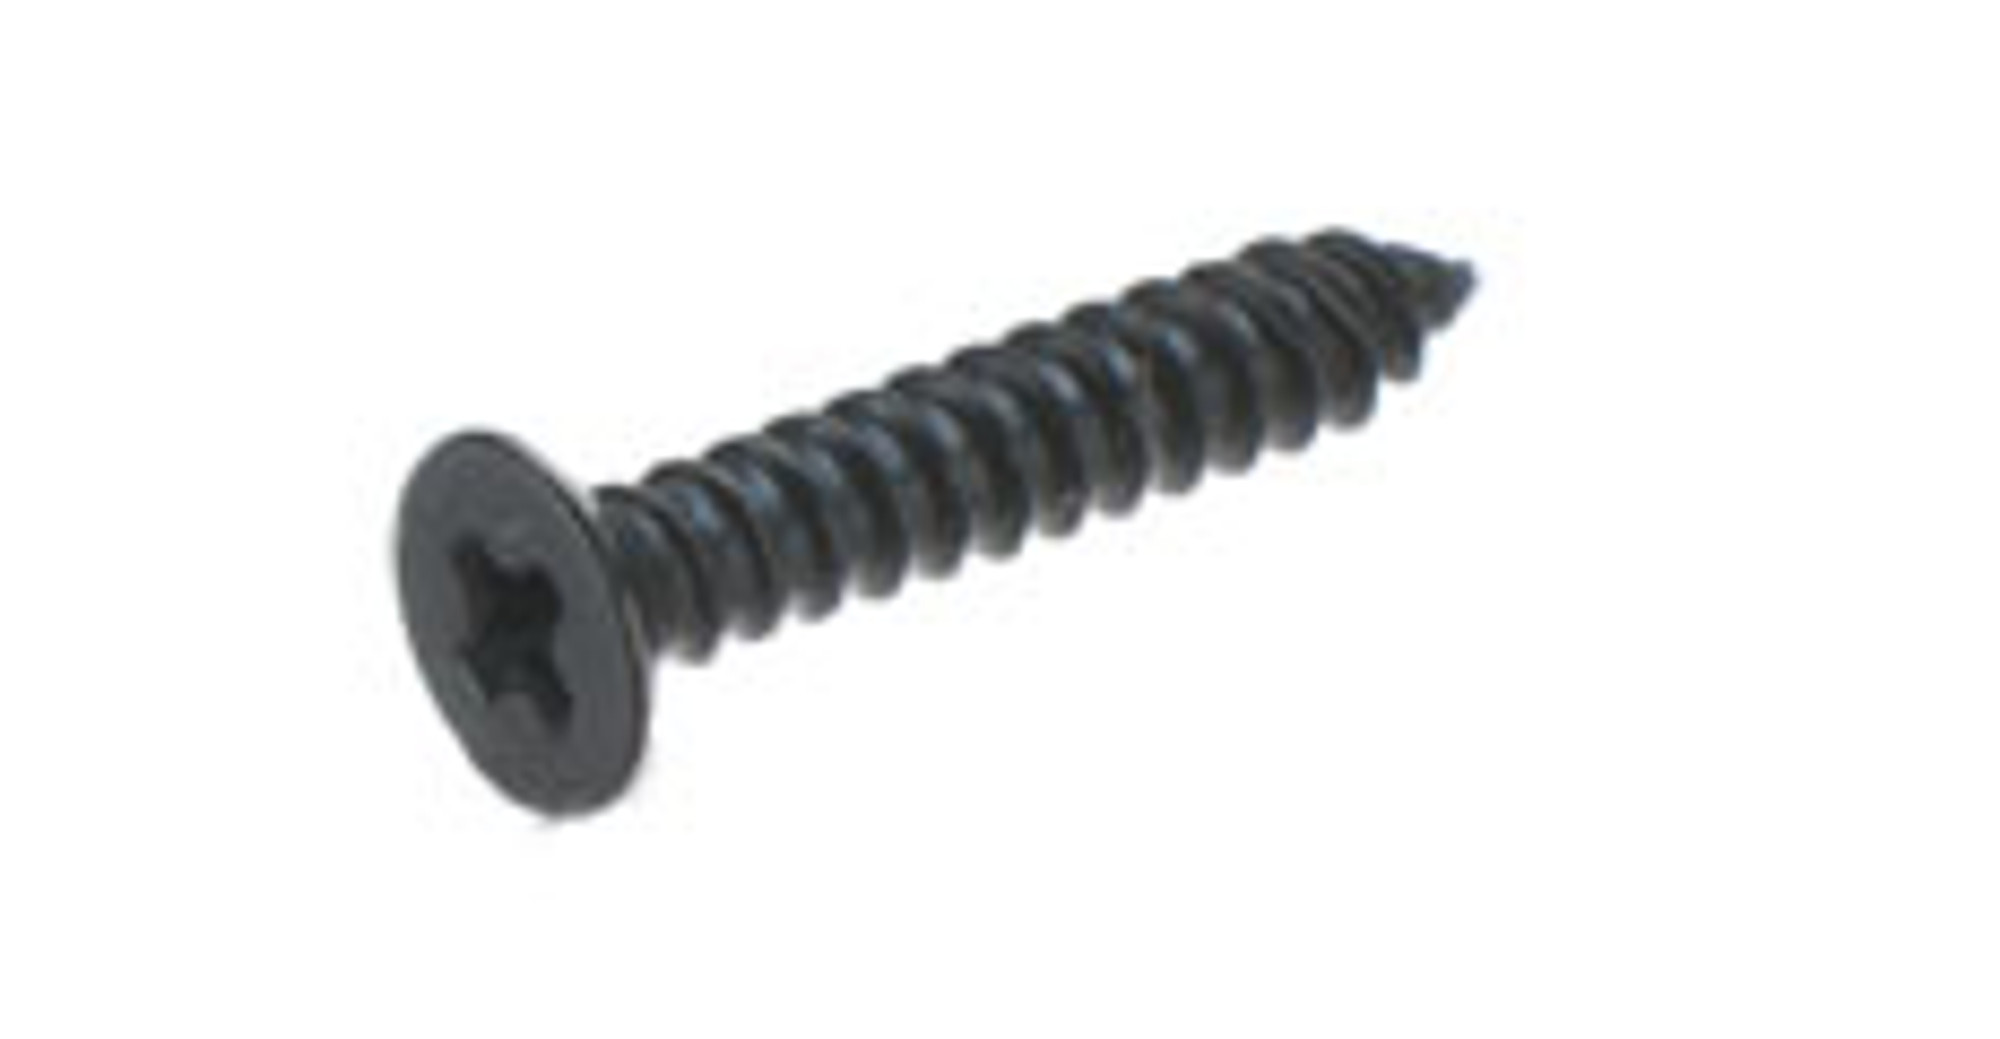 WE-Tech Frame Screw for Hi-CAPA Series Airsoft GBB Pistols - Part #37